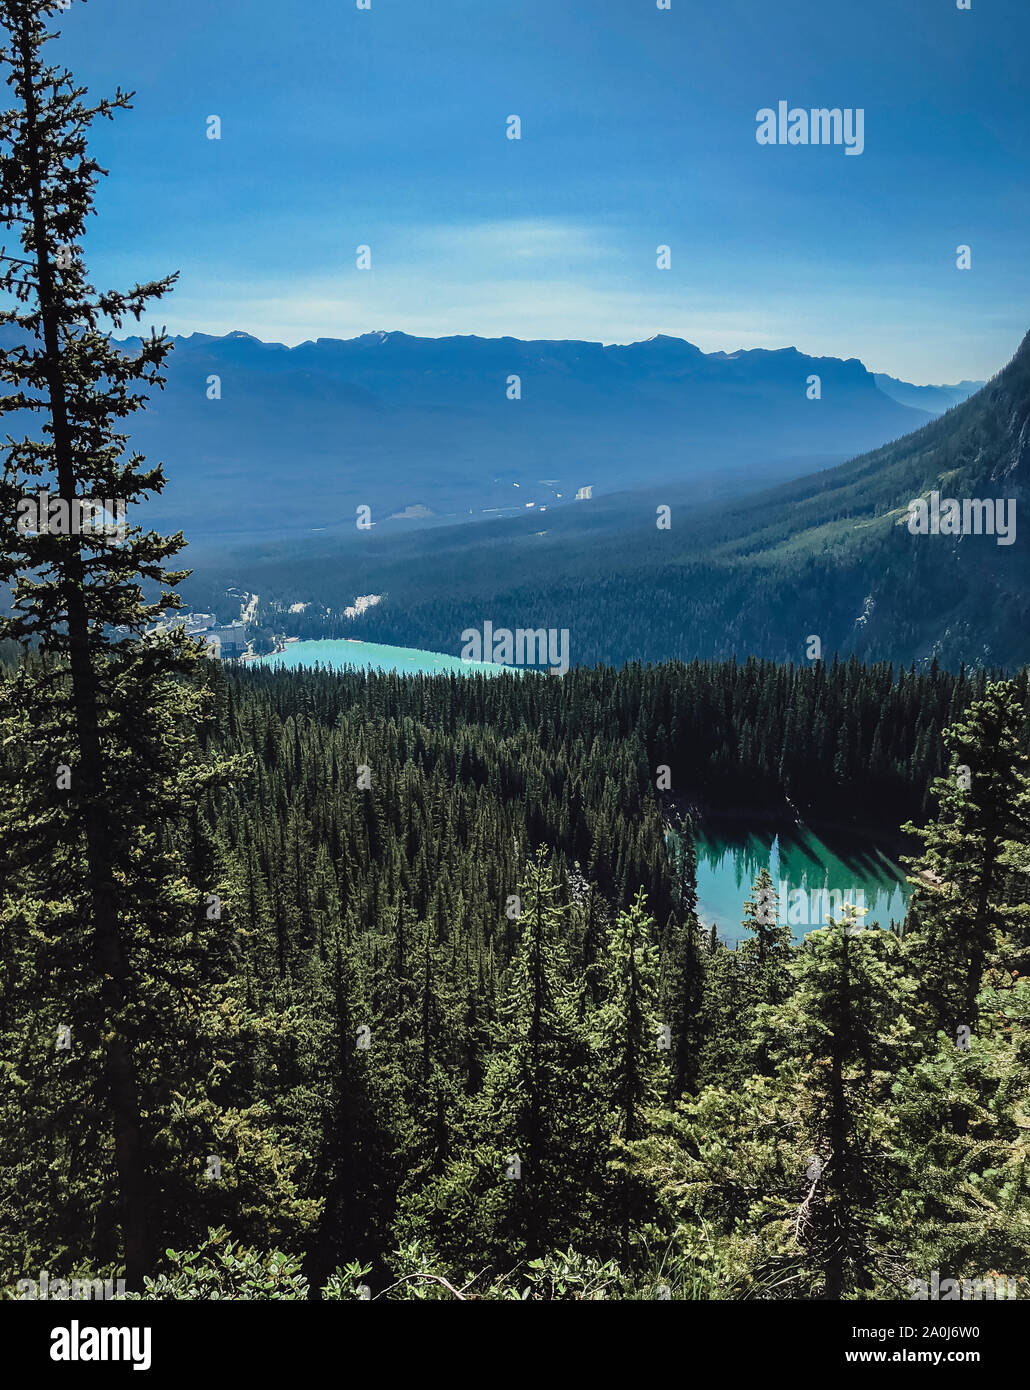 View of lakes, forest and mountains in Banff from high above. Stock Photo